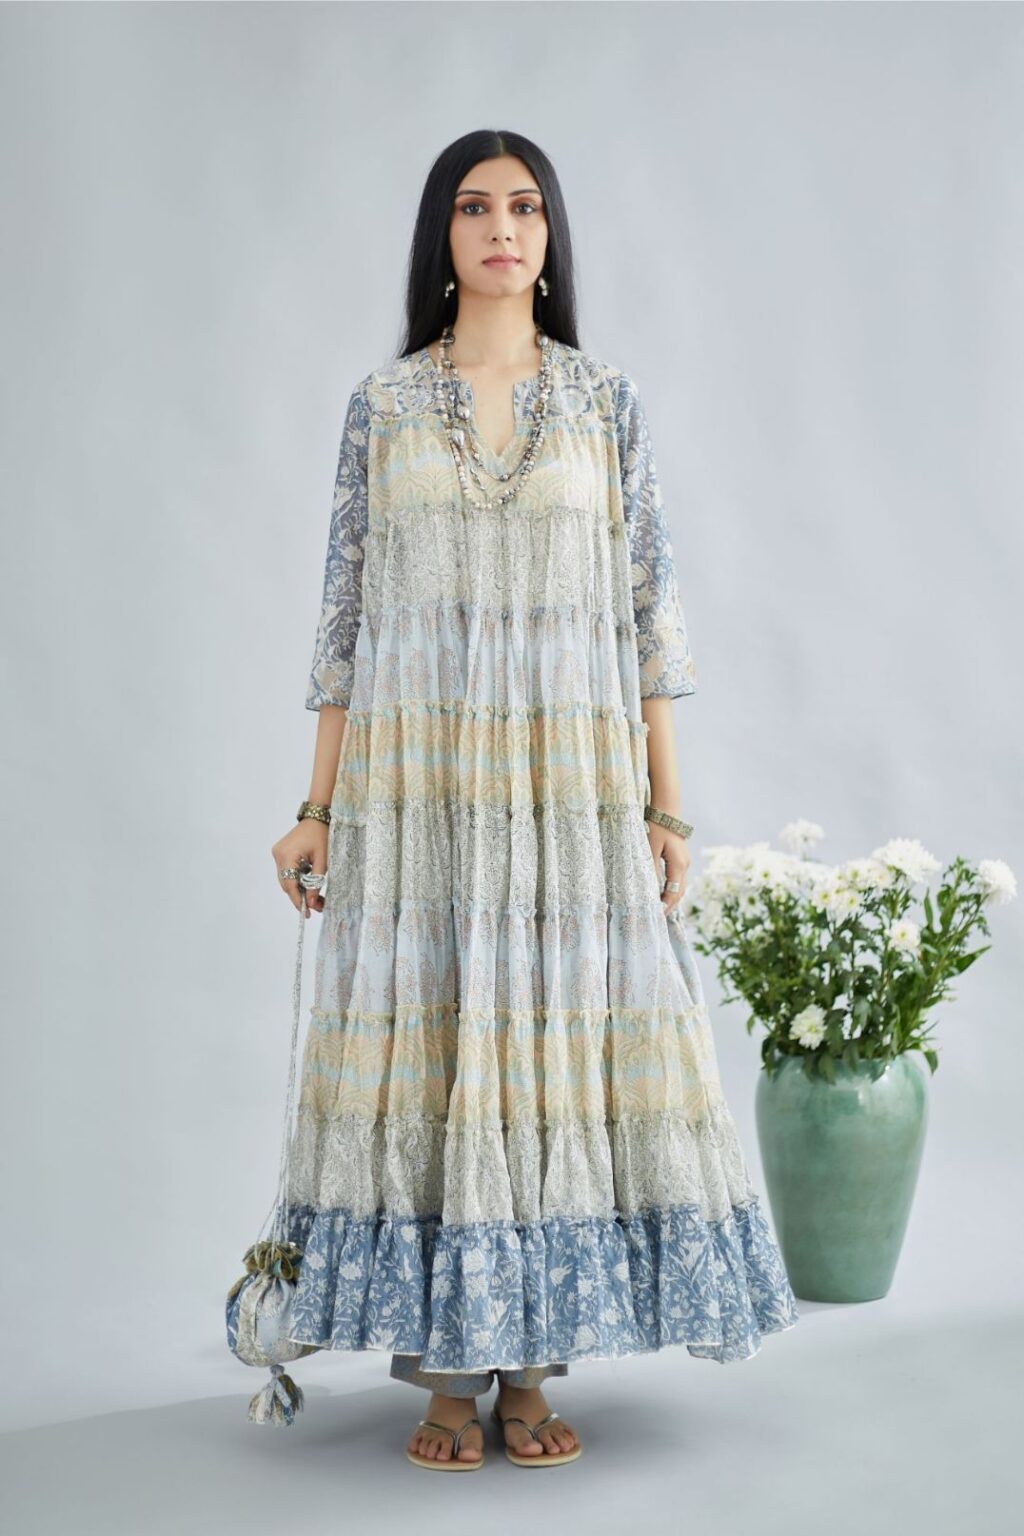 Hand block printed multi-tiered kurta set dress with 3/4 sleeves and cutwork detailing